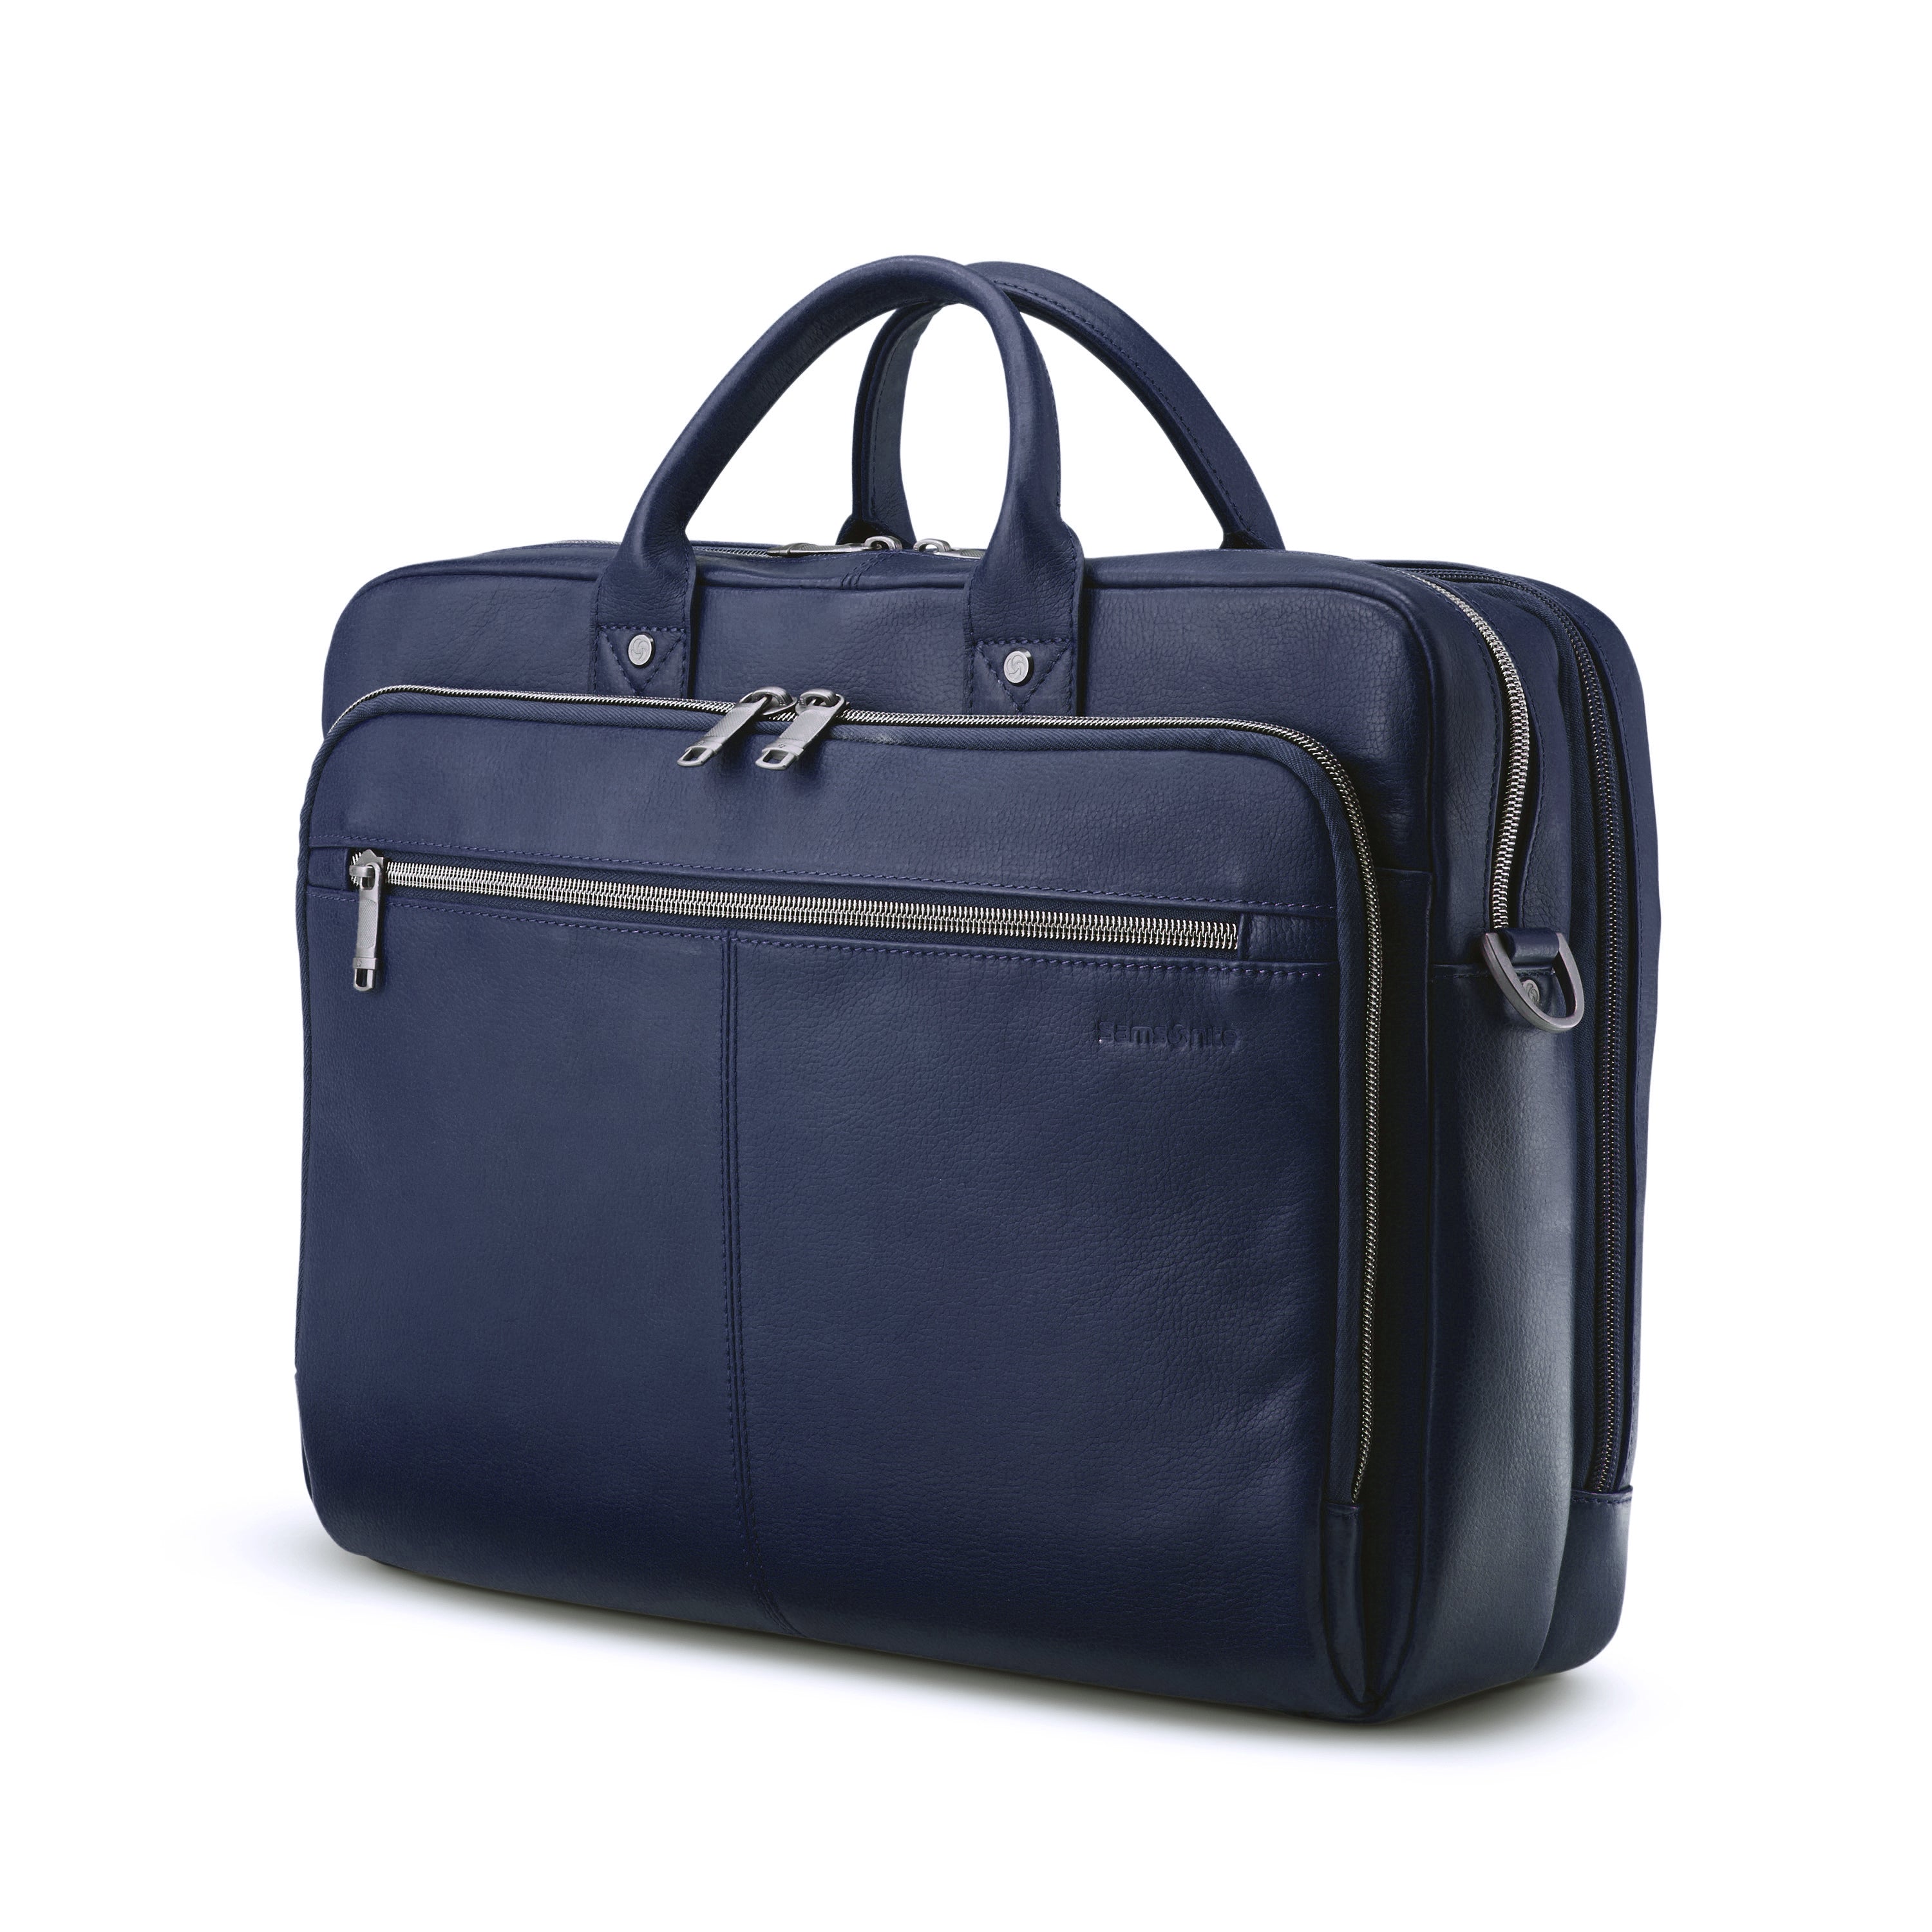 Samsonite Classic Leather 126039 Top Loader Briefcase - Navy